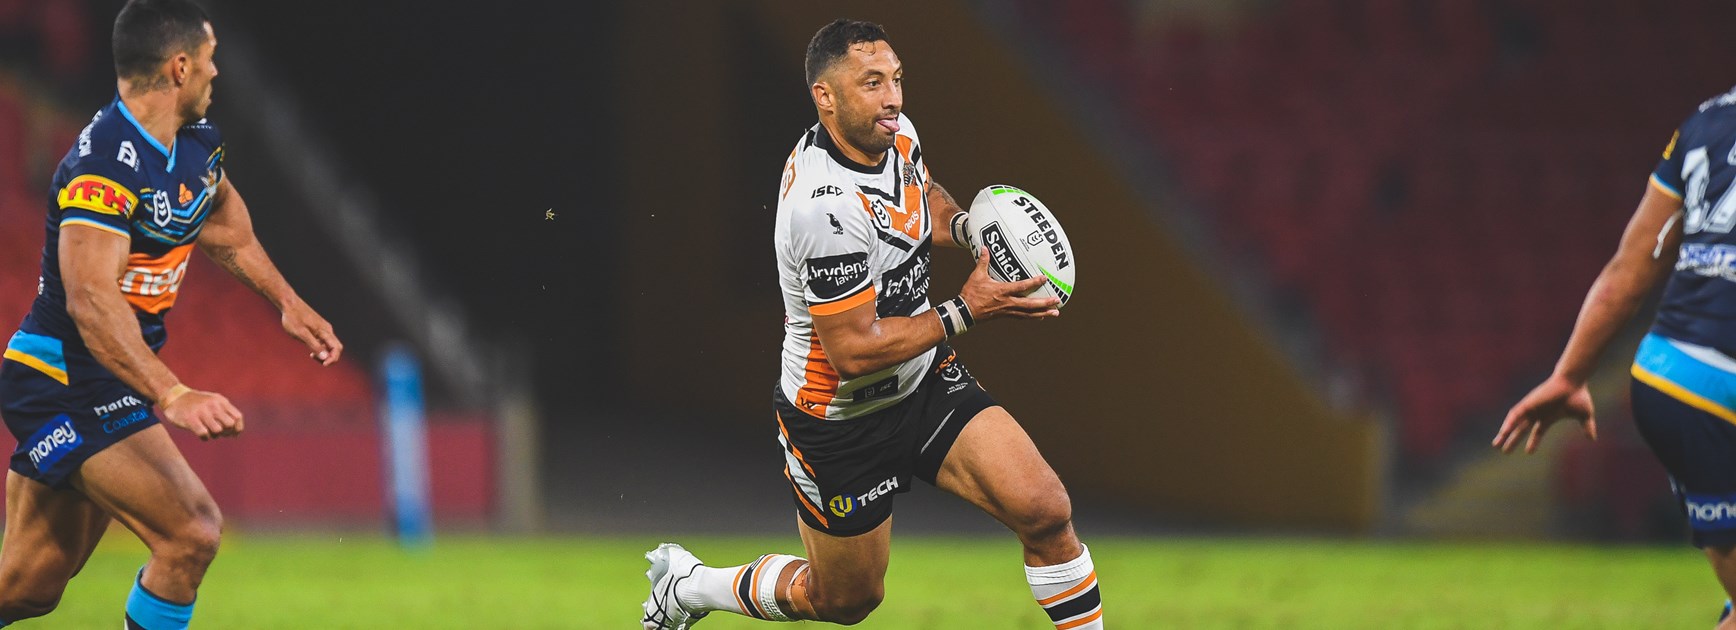 Wests Tigers go down in last-minute thriller